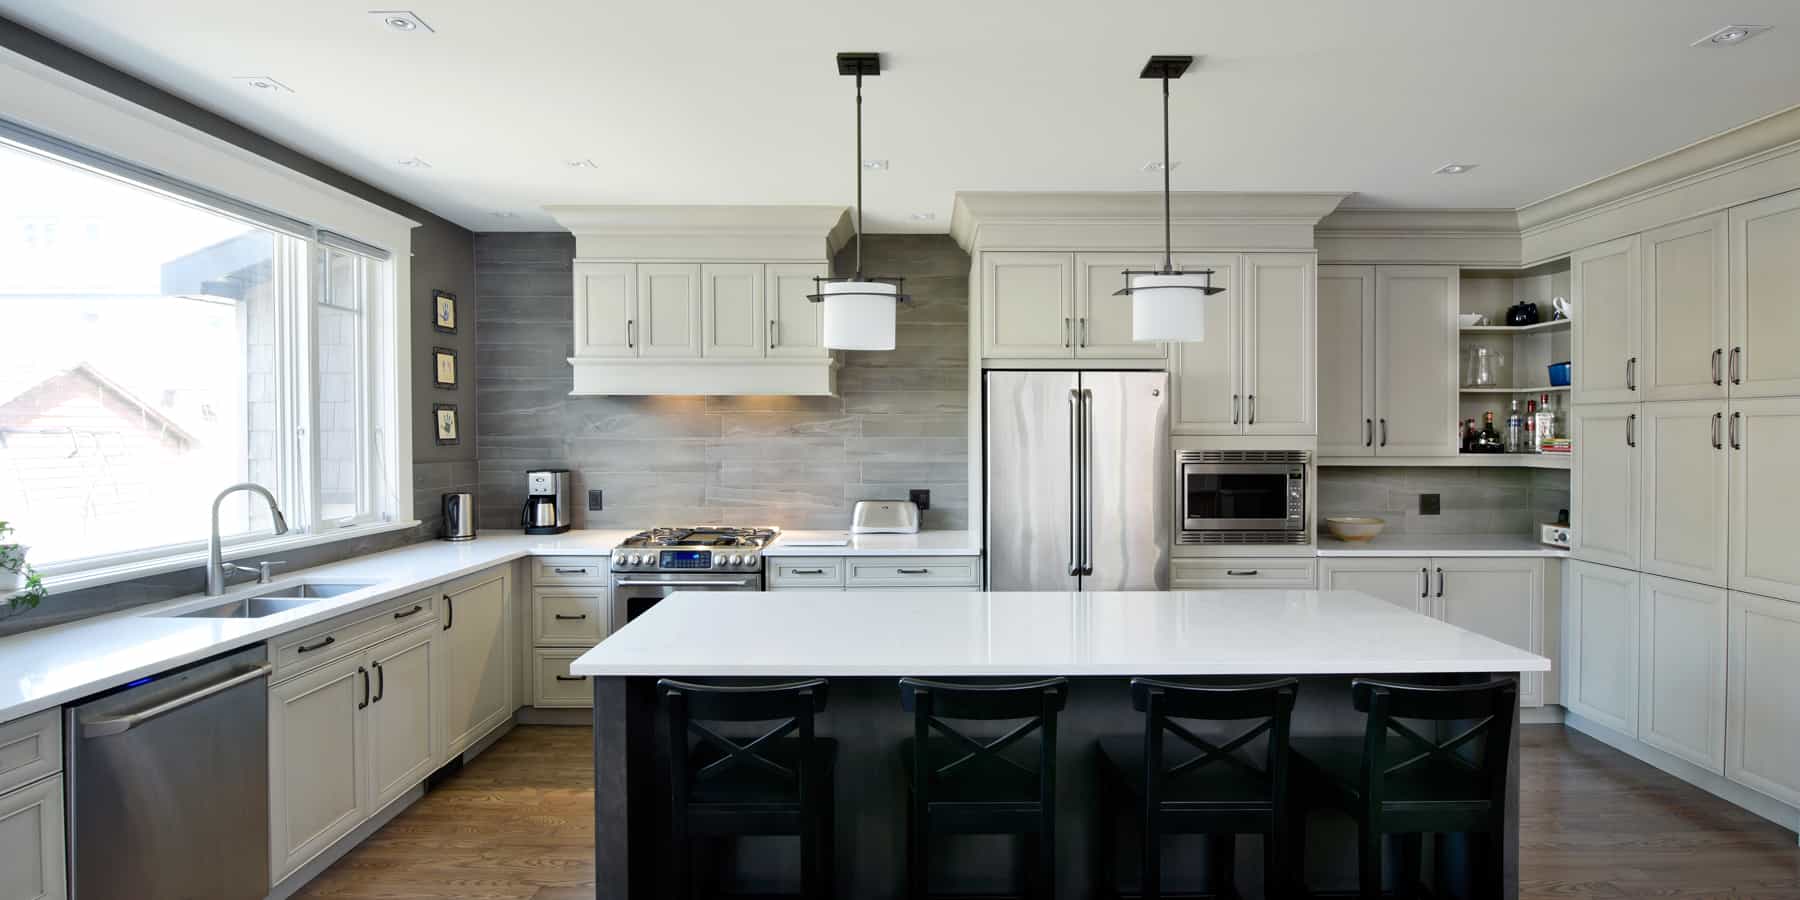 Open-concept two-tone kitchen with cream coloured upper cabinets, dark lower cabinets and spacious island.